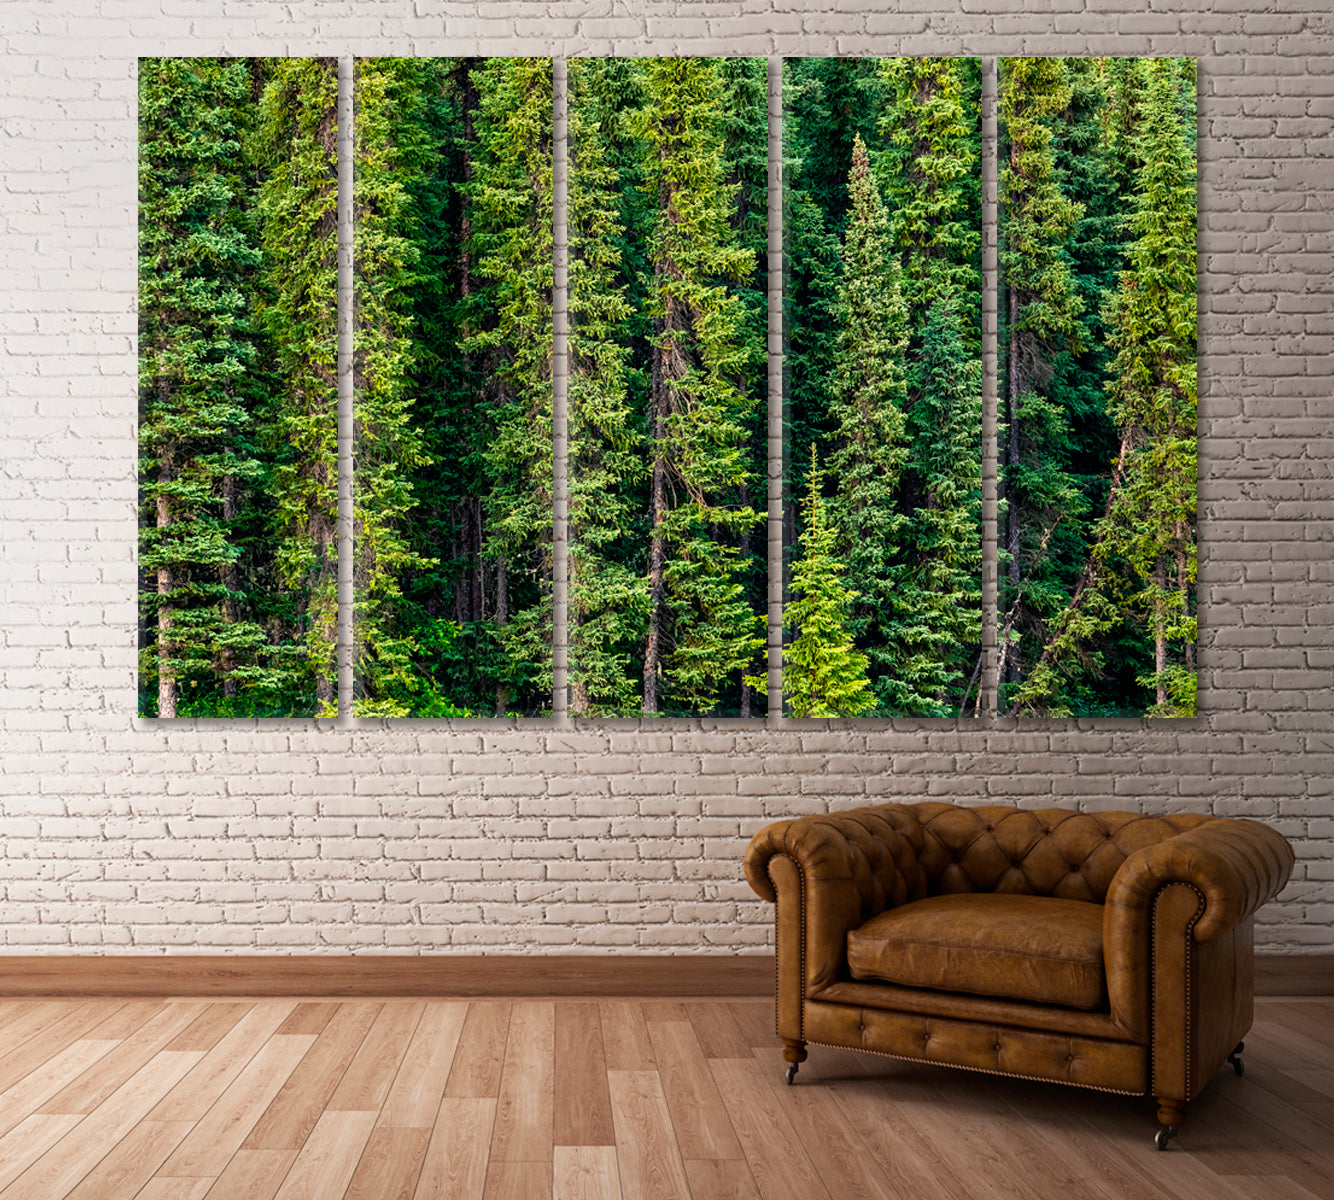 Tongass National Forest Alaska Canvas Print ArtLexy 5 Panels 36"x24" inches 